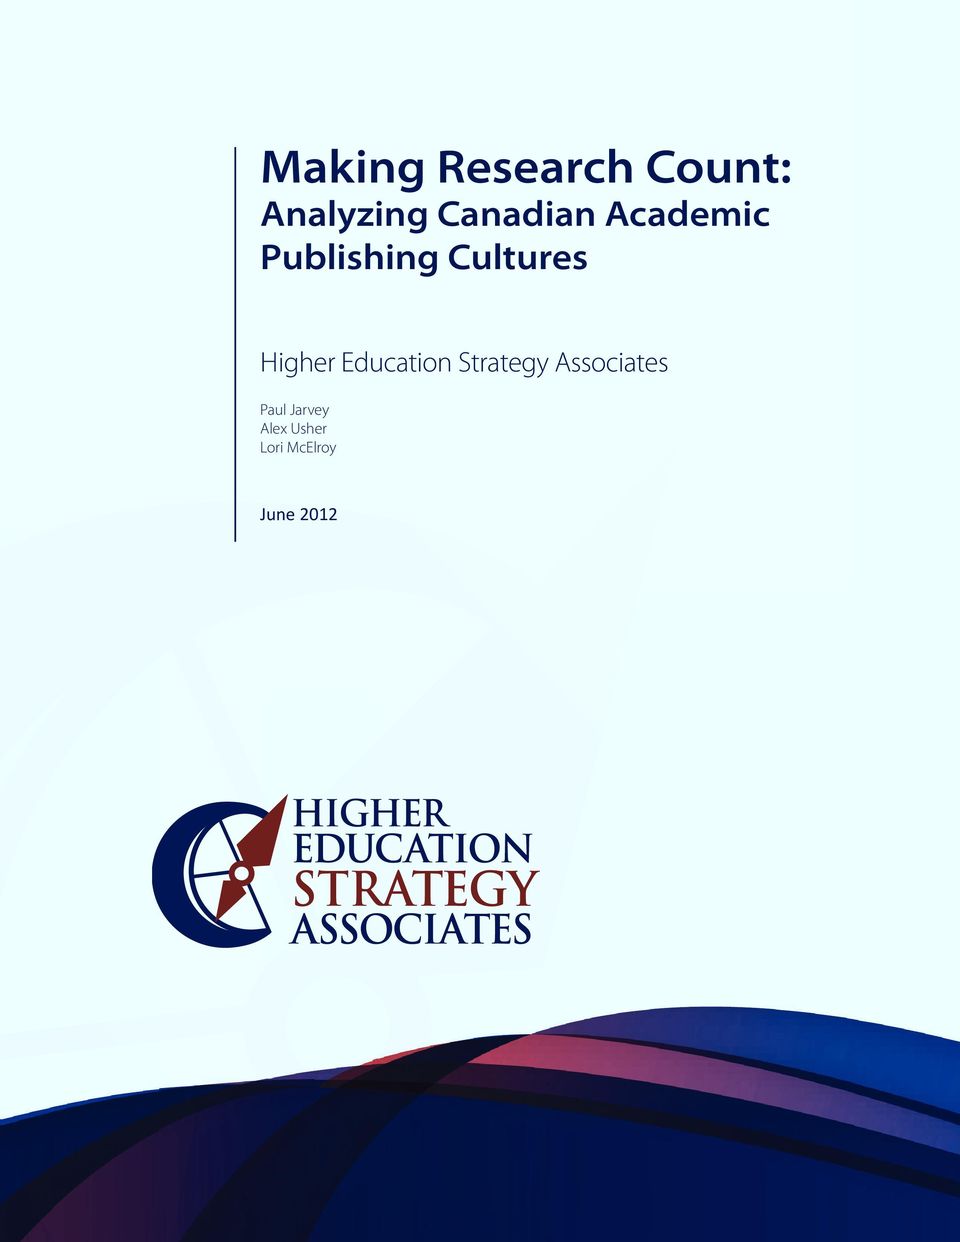 Cultures Higher Education Strategy